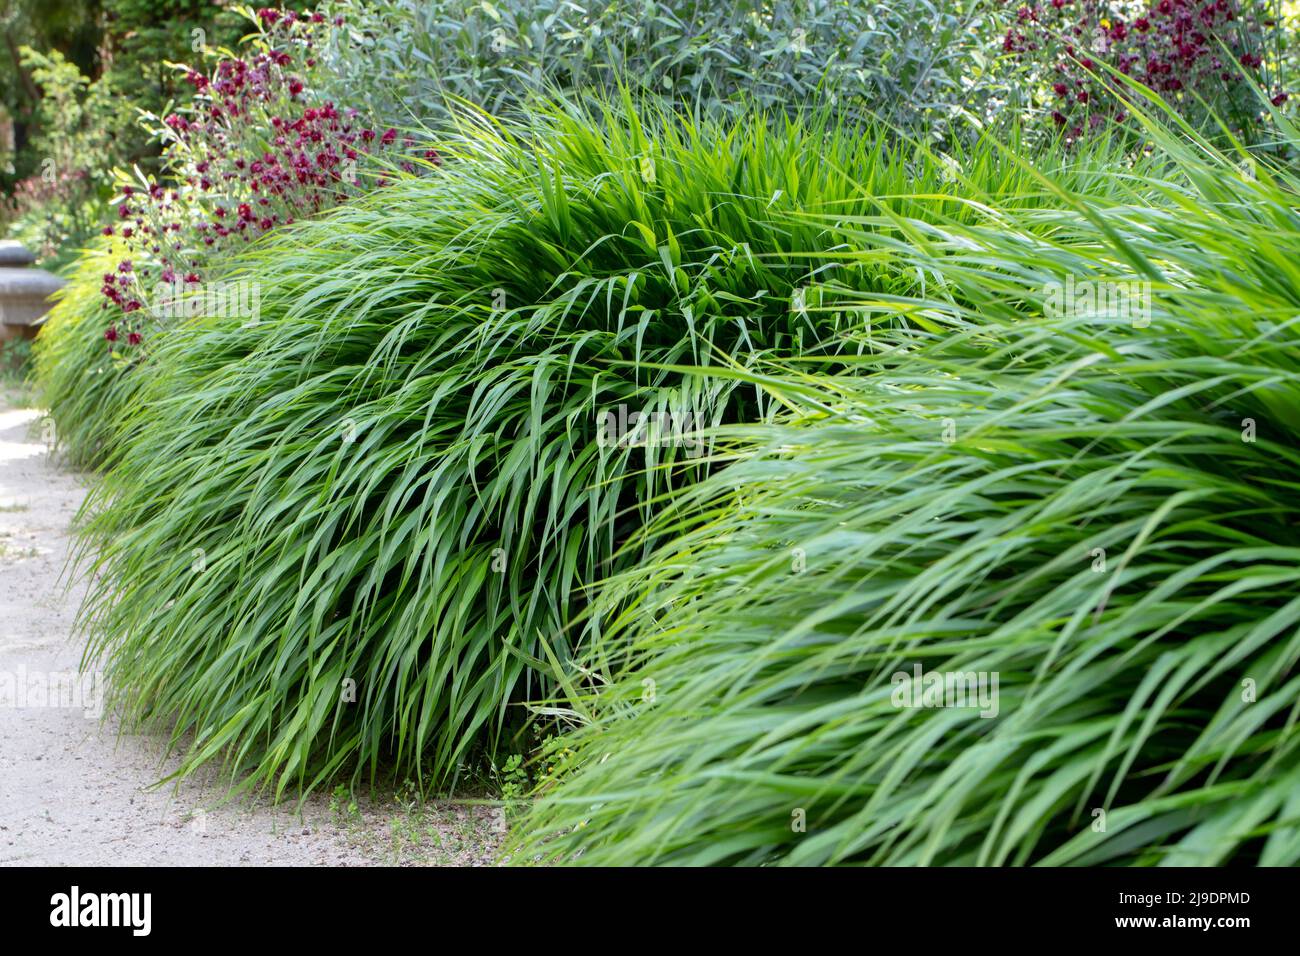 Hakonechloa macra or hakone grass or japanese forest grass bamboo-like ornamental plant  with cascading mounds of lush green foliage Stock Photo